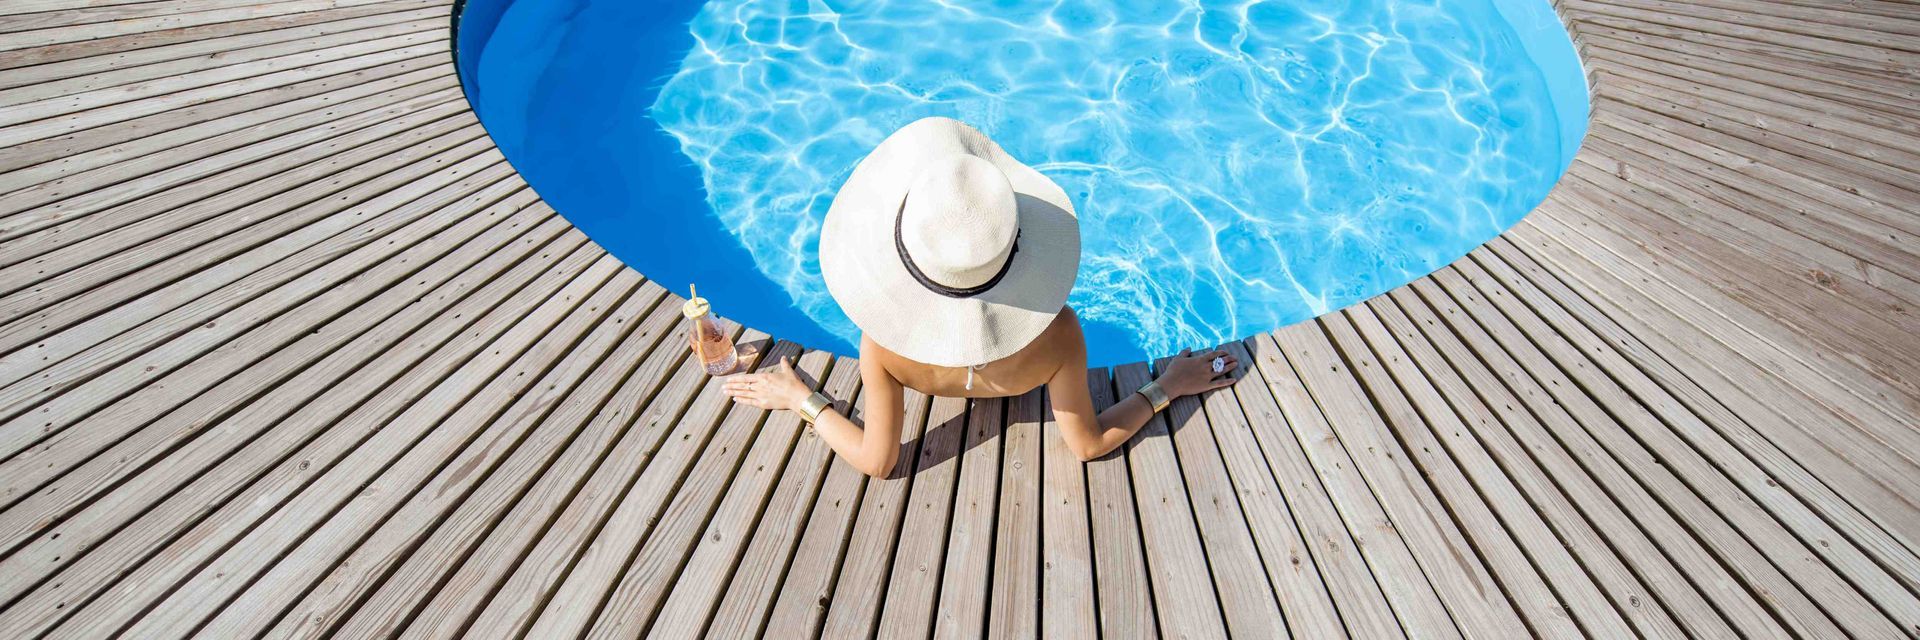 A woman chilling in her circular pool with a sun hat on and a drink by her hand on the deck